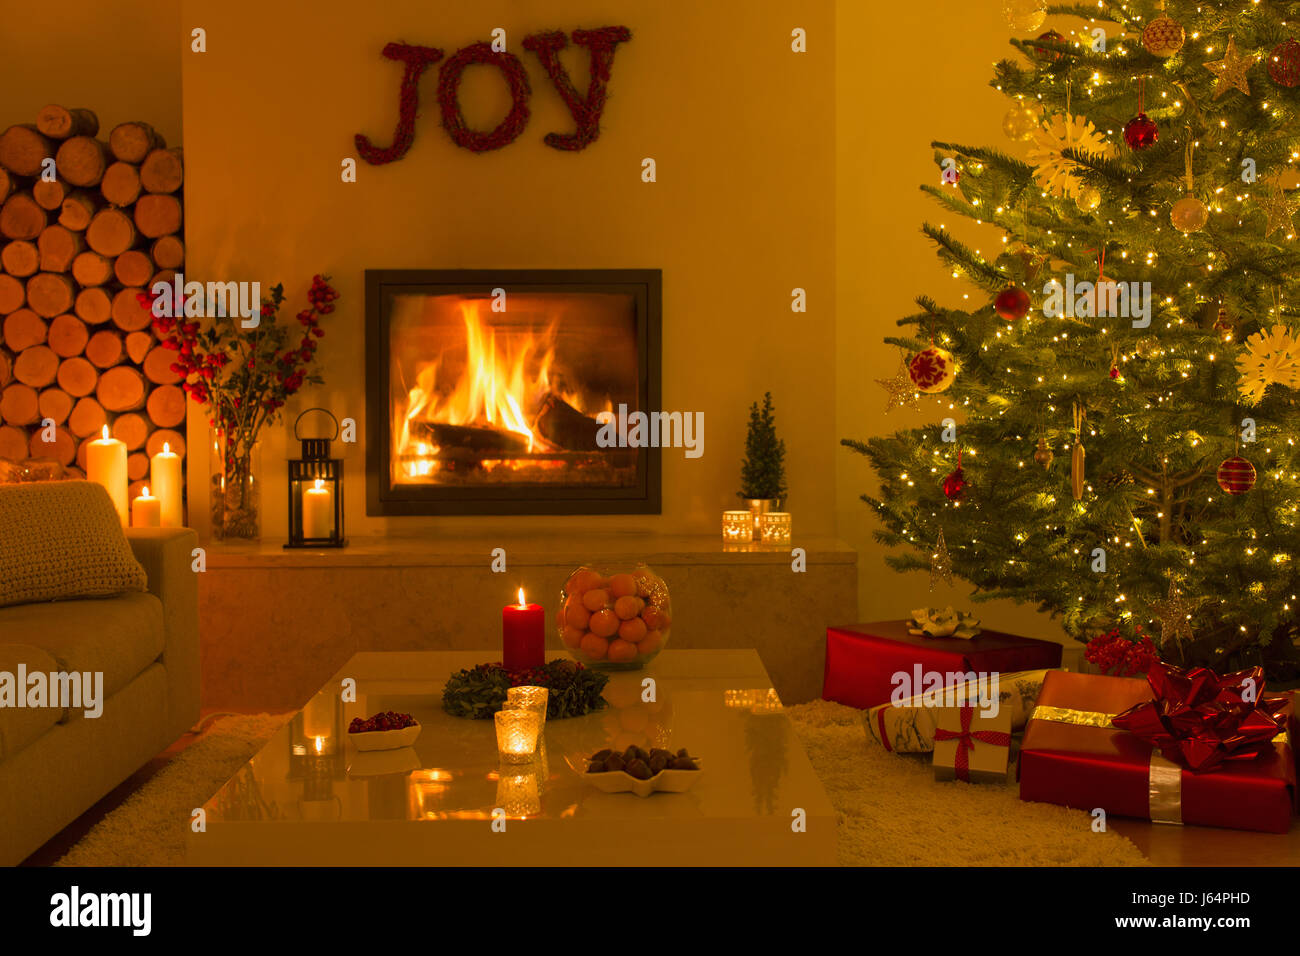 Ambient fireplace and candles in living room with Christmas tree Stock Photo